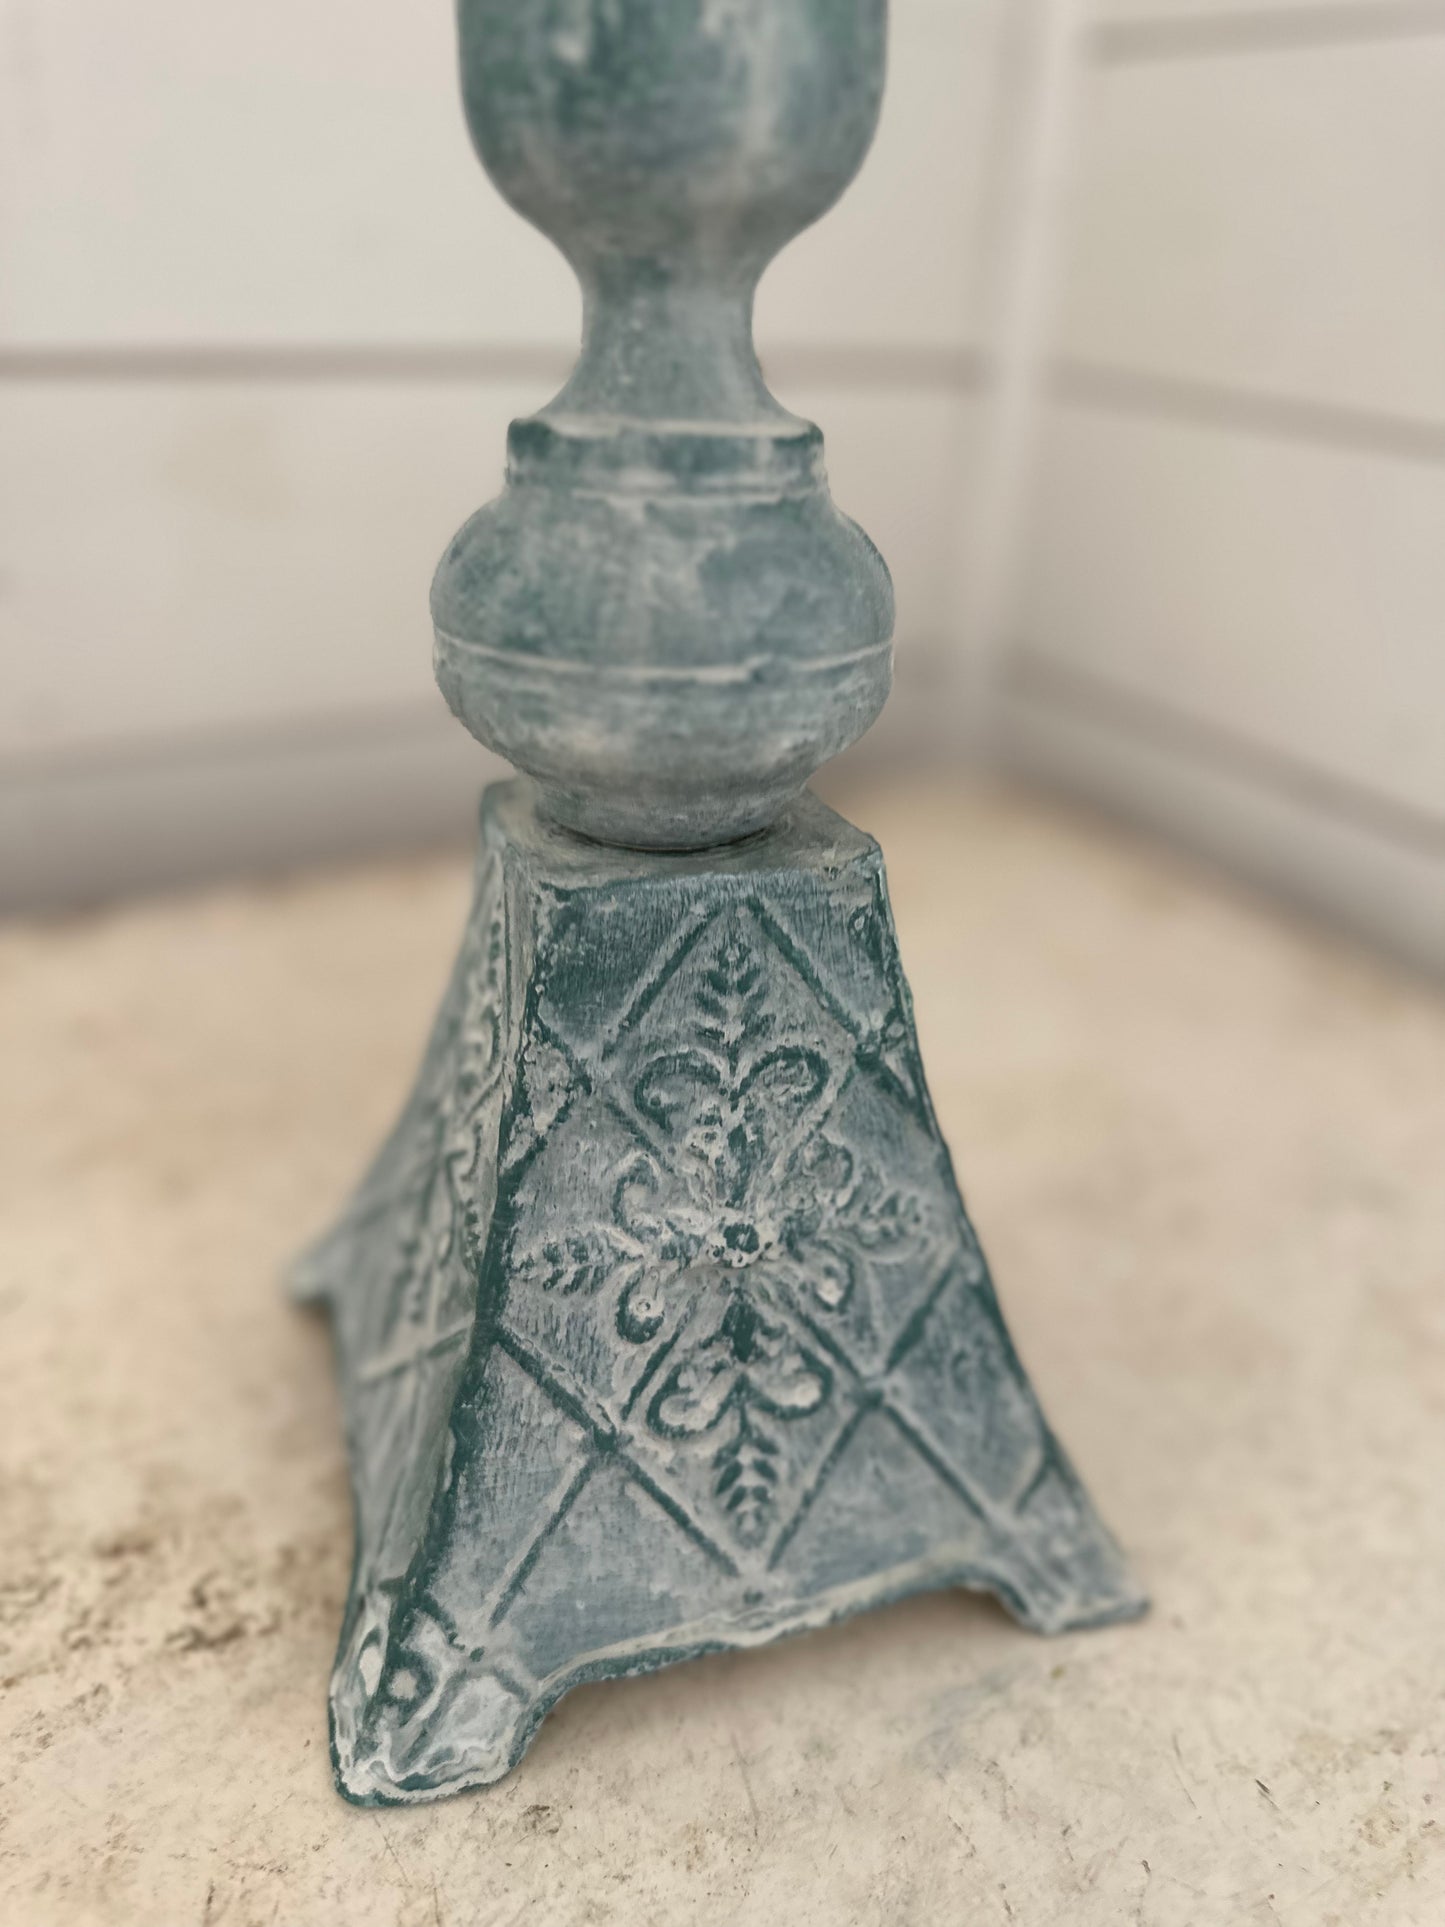 Ornate metal candlestick- hand painted